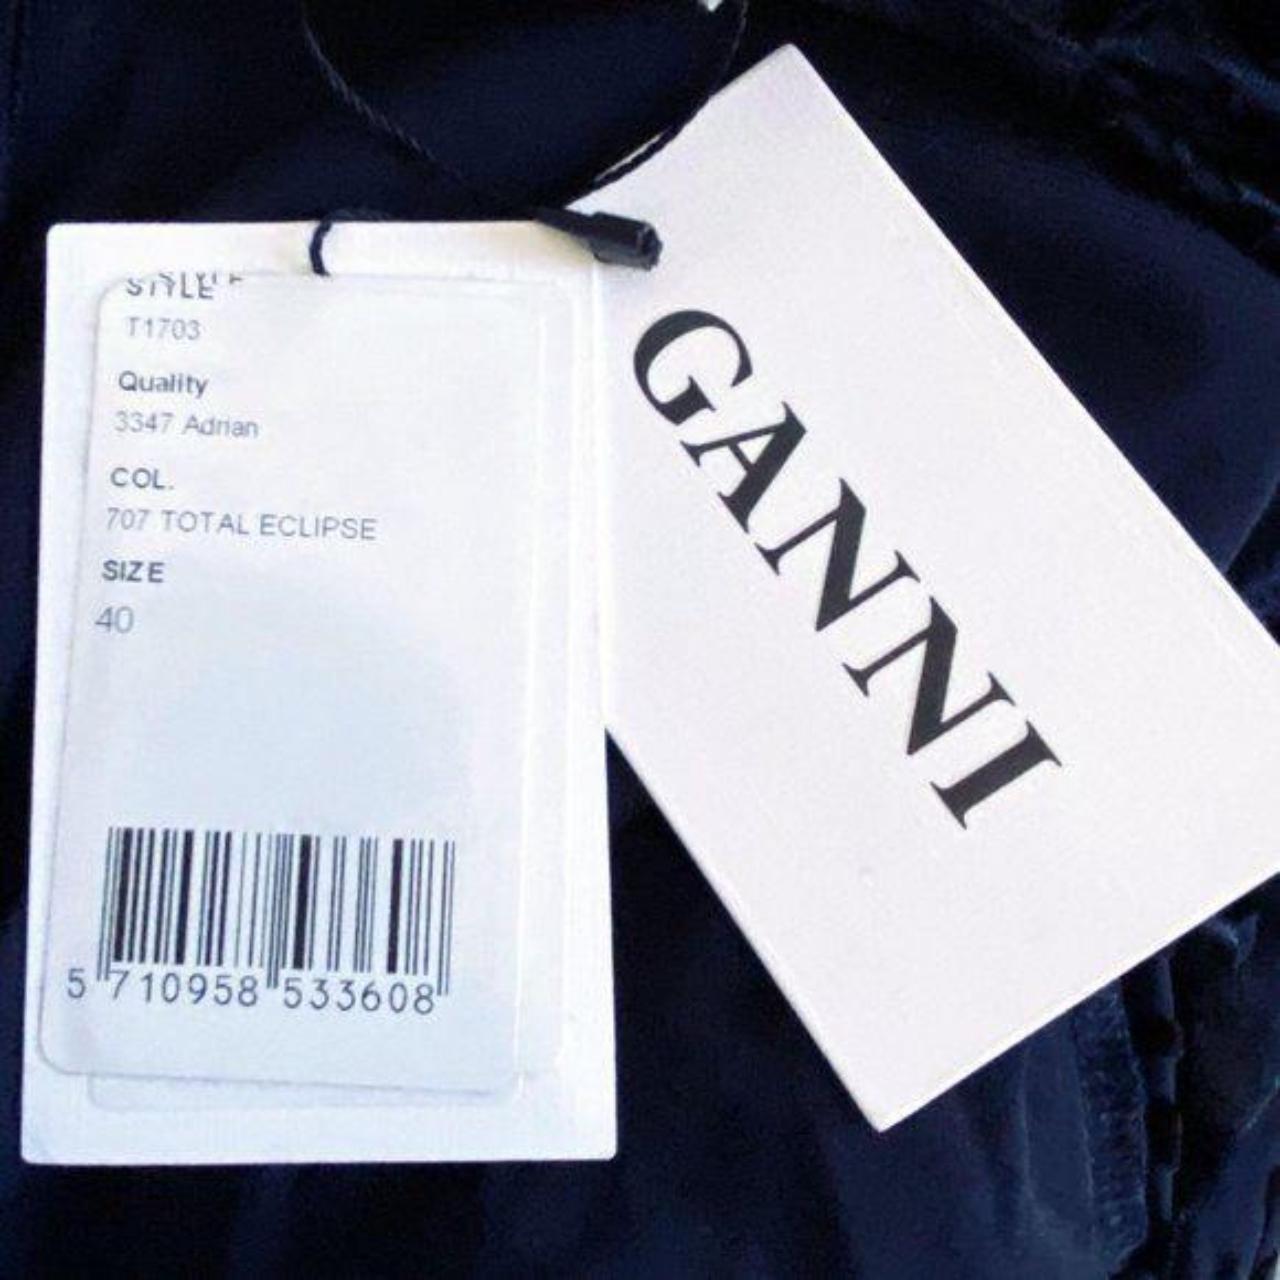 Product Image 2 - Brand new with tags
Ganni Adruan